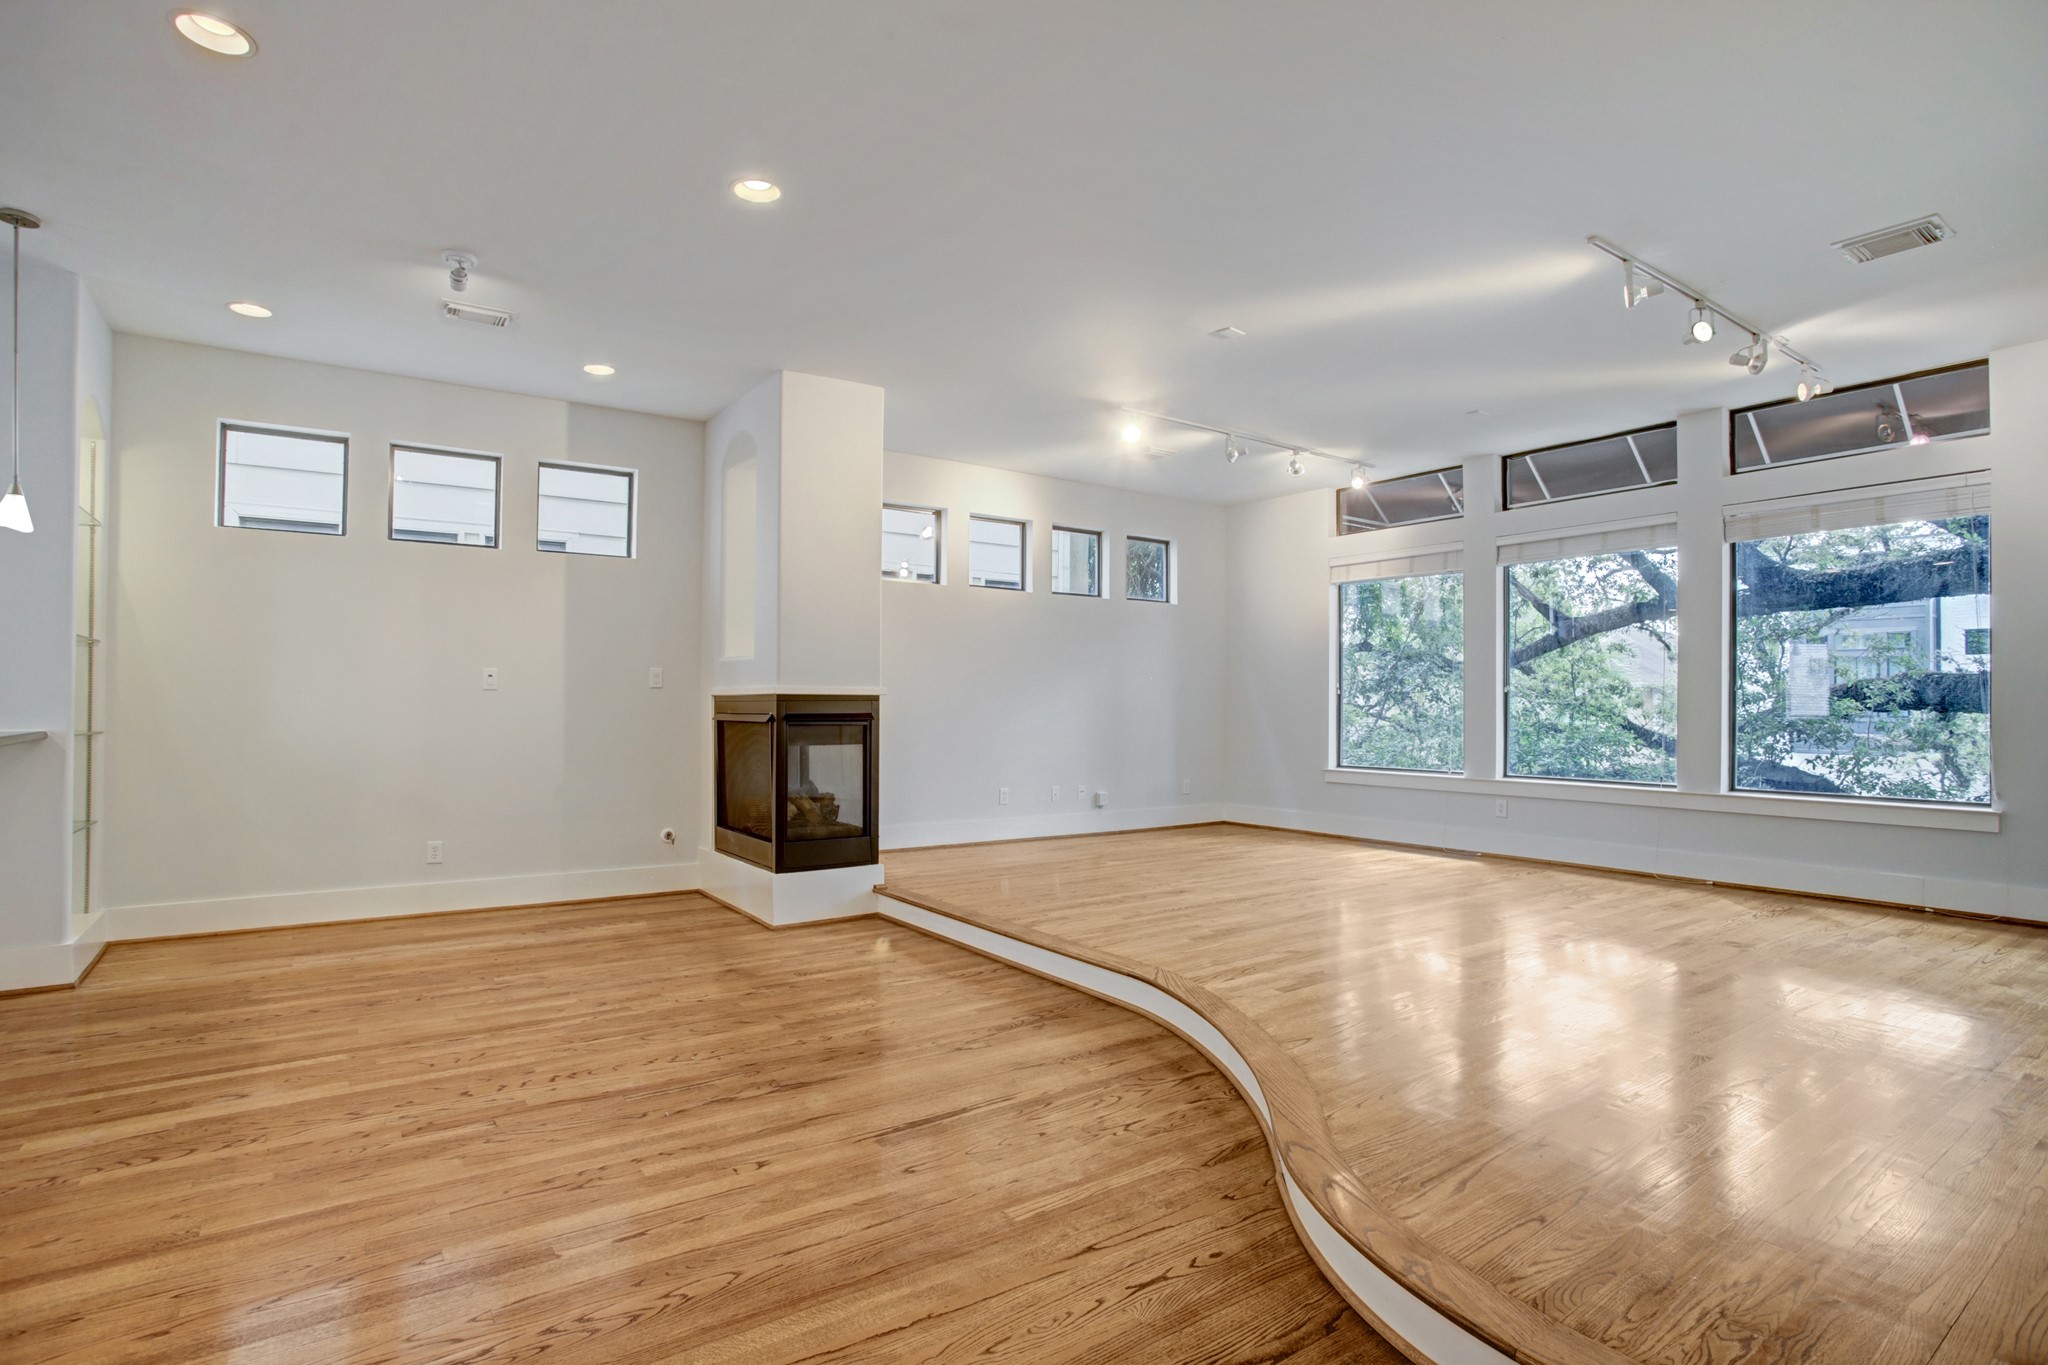 Great view of the living space and 3-sided fireplace lit naturally by the wall of windows. Notice the beautiful Oak tree just outside the wall of windows. 4622 Feagan can be your own private tree house.